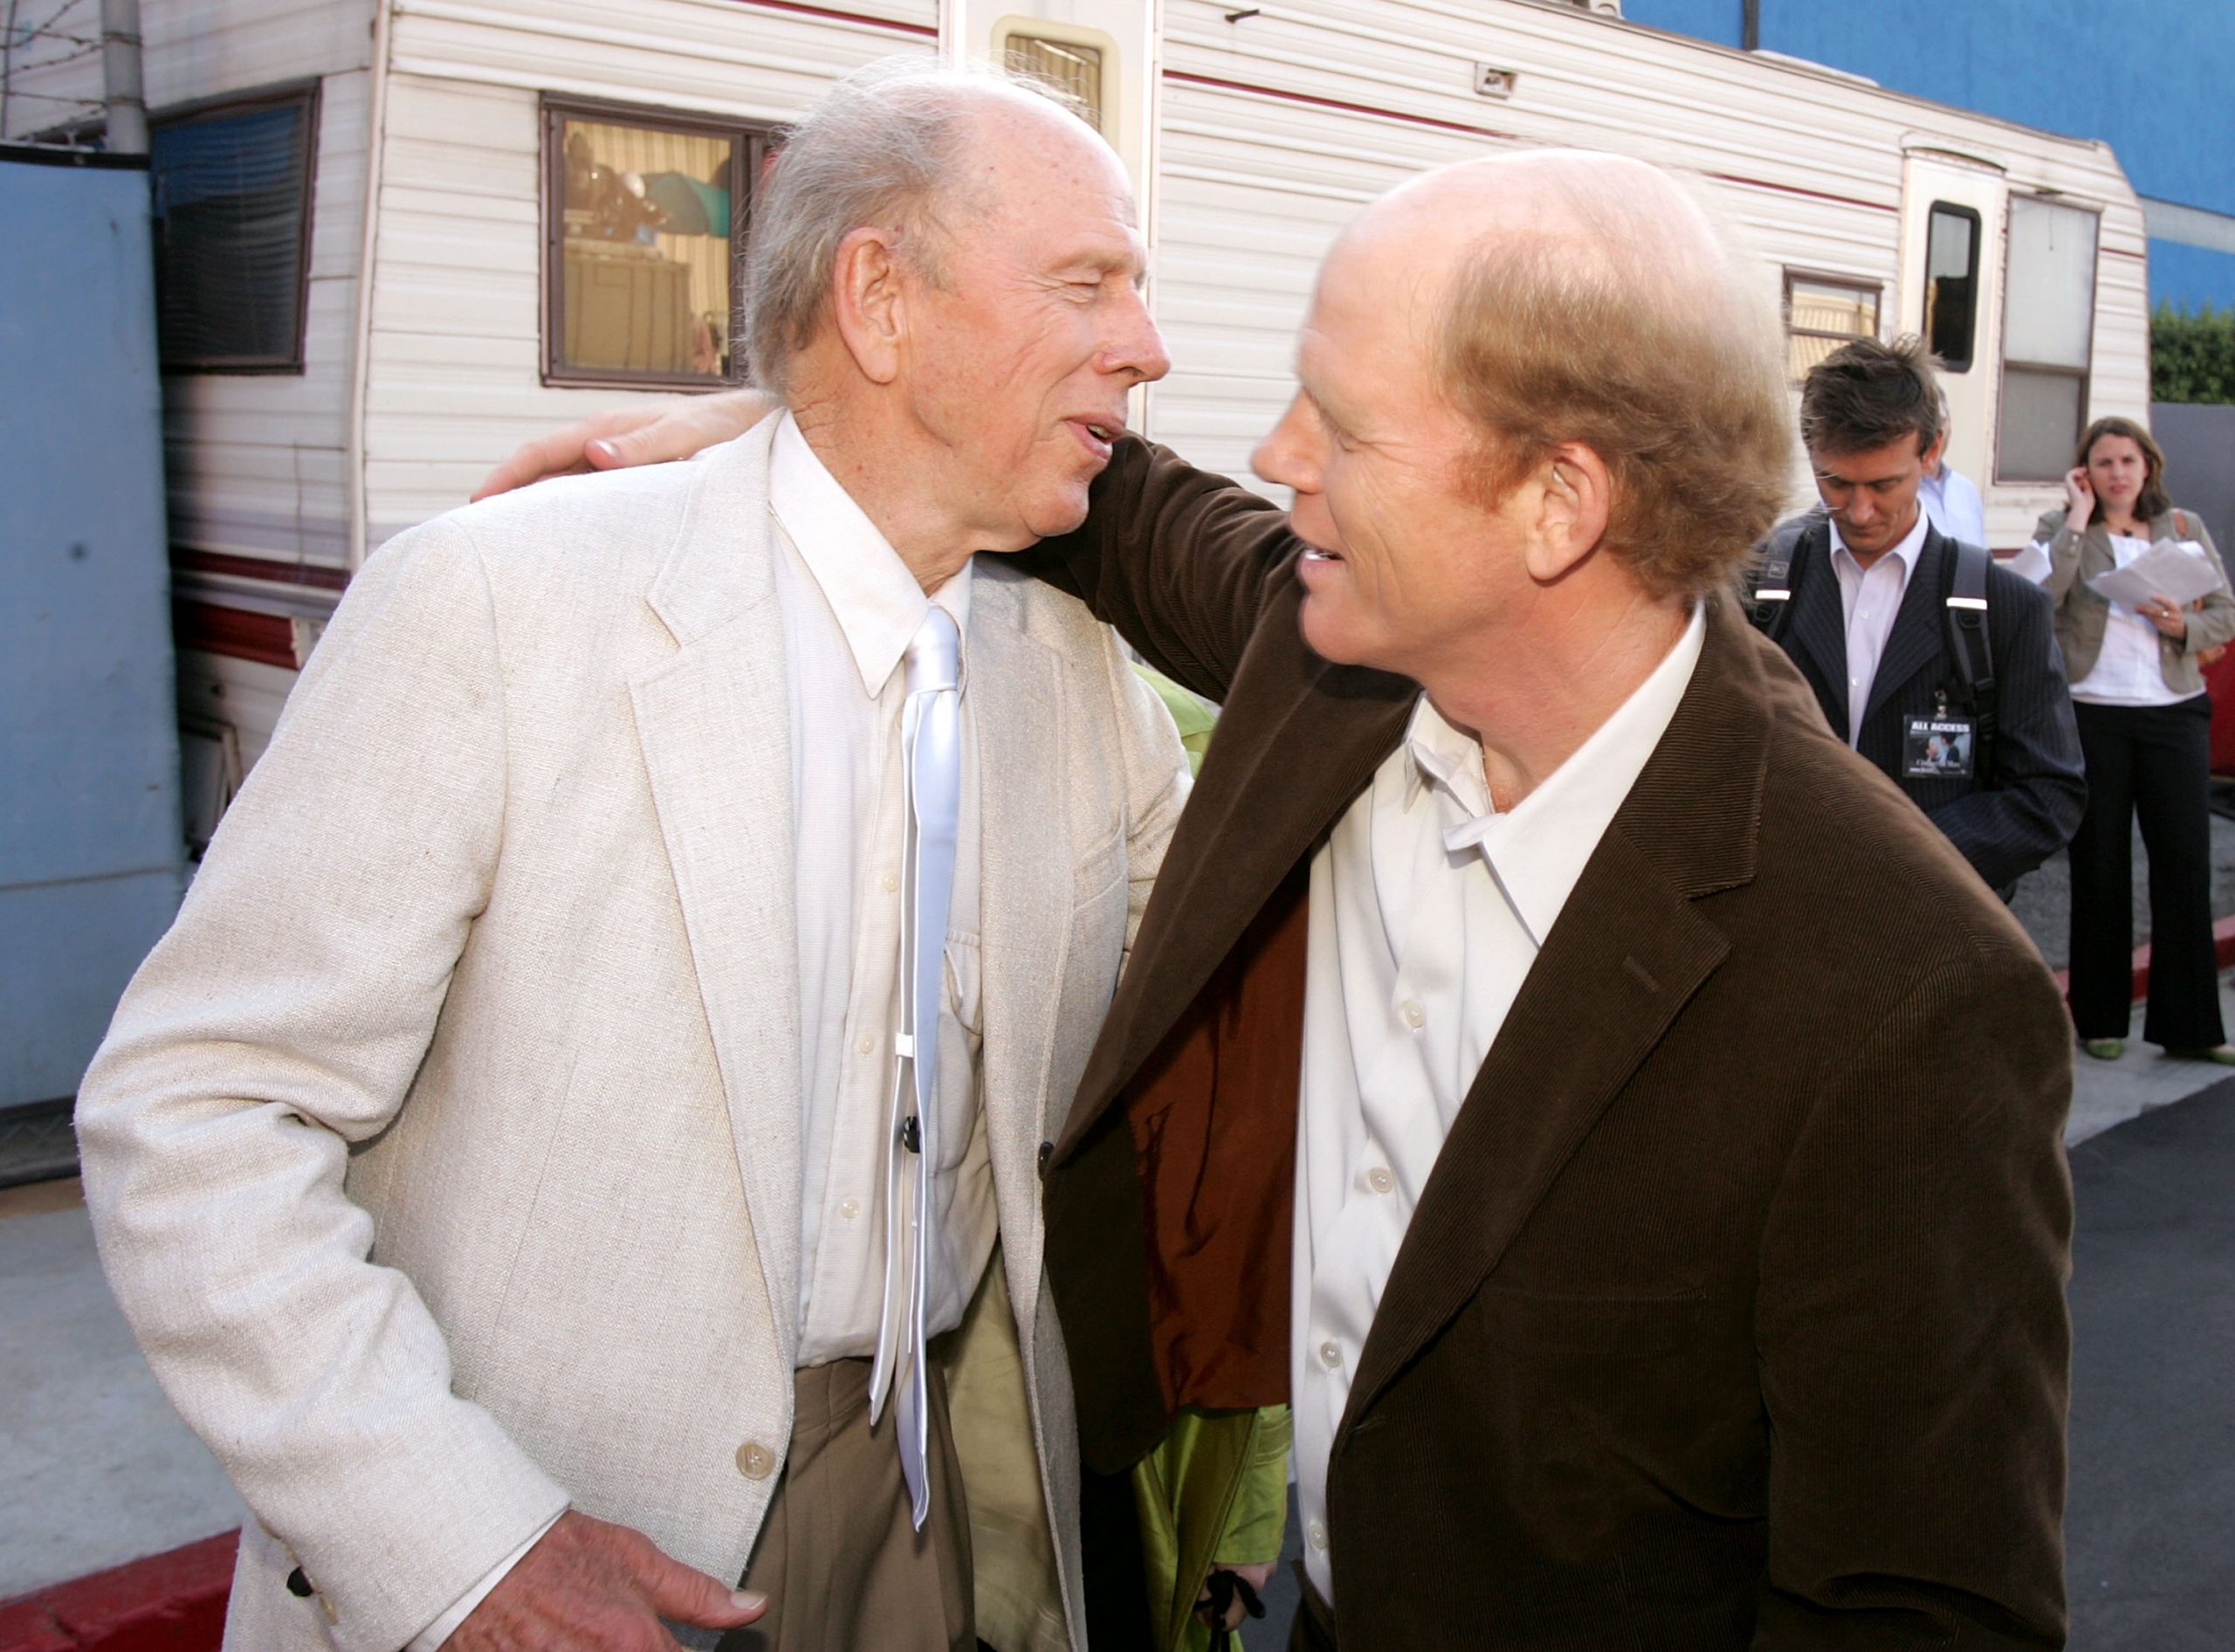 (L to R): Actor Rance Howard embraces his son, the Oscar-winning director Ron Howard, 2005.